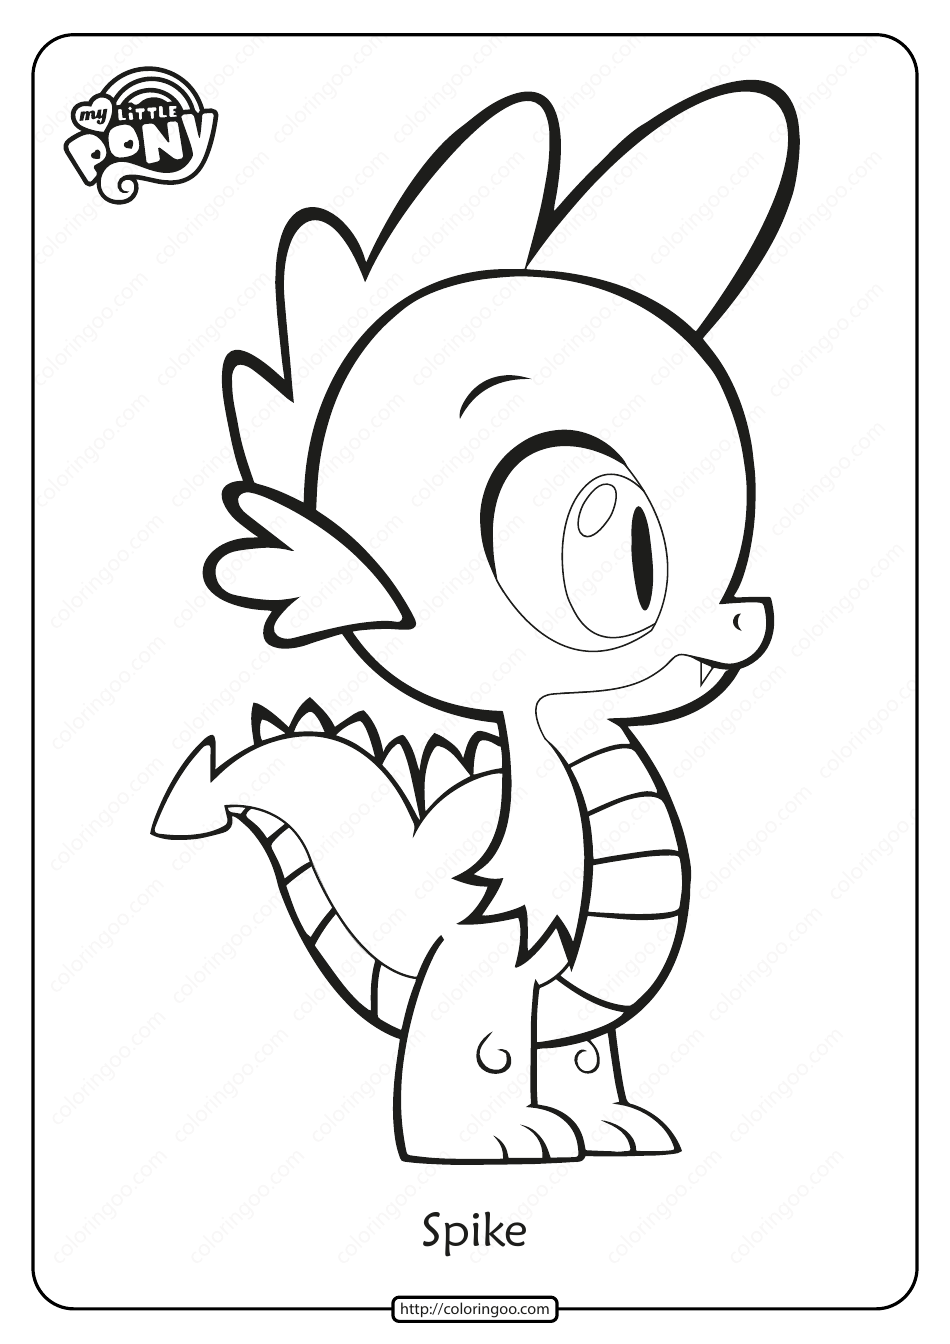 My Little Pony Coloring Page - Spike, Page 1